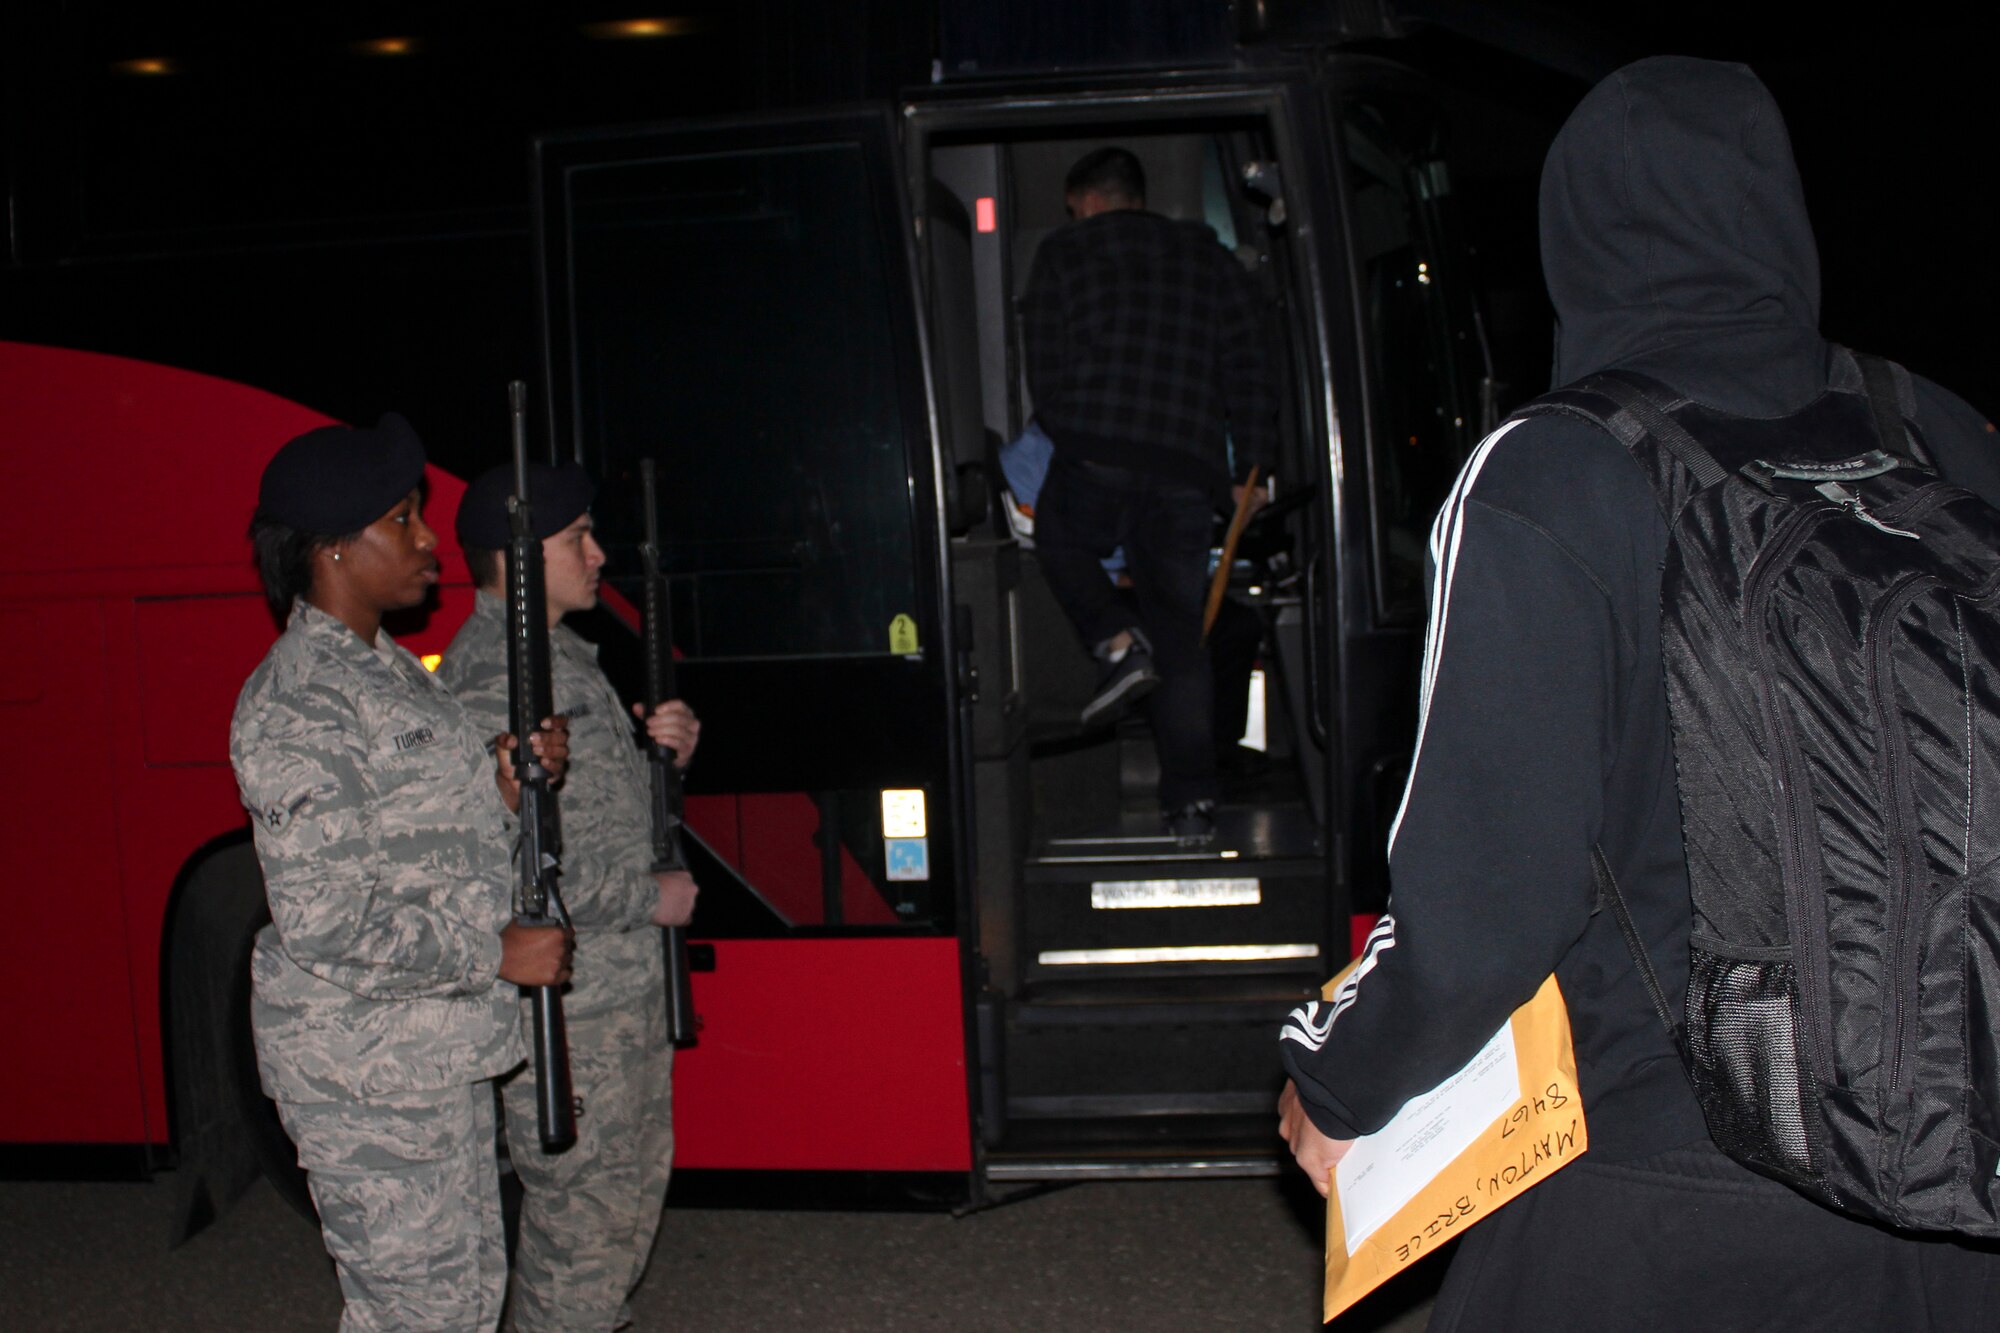 VANDENBERG AIR FORCE BASE, Calif. – Members of the 30th Security Forces Squadron honor guard present arms to 12 of their deployers as they board a bus here Sunday, March 24, 2013. Twelve 30th SFS members left the base at 2 a.m. bound for a deployed location in Southeast Asia. (U.S. Air Force photo/2nd Lt. Kaylee Ausbun)